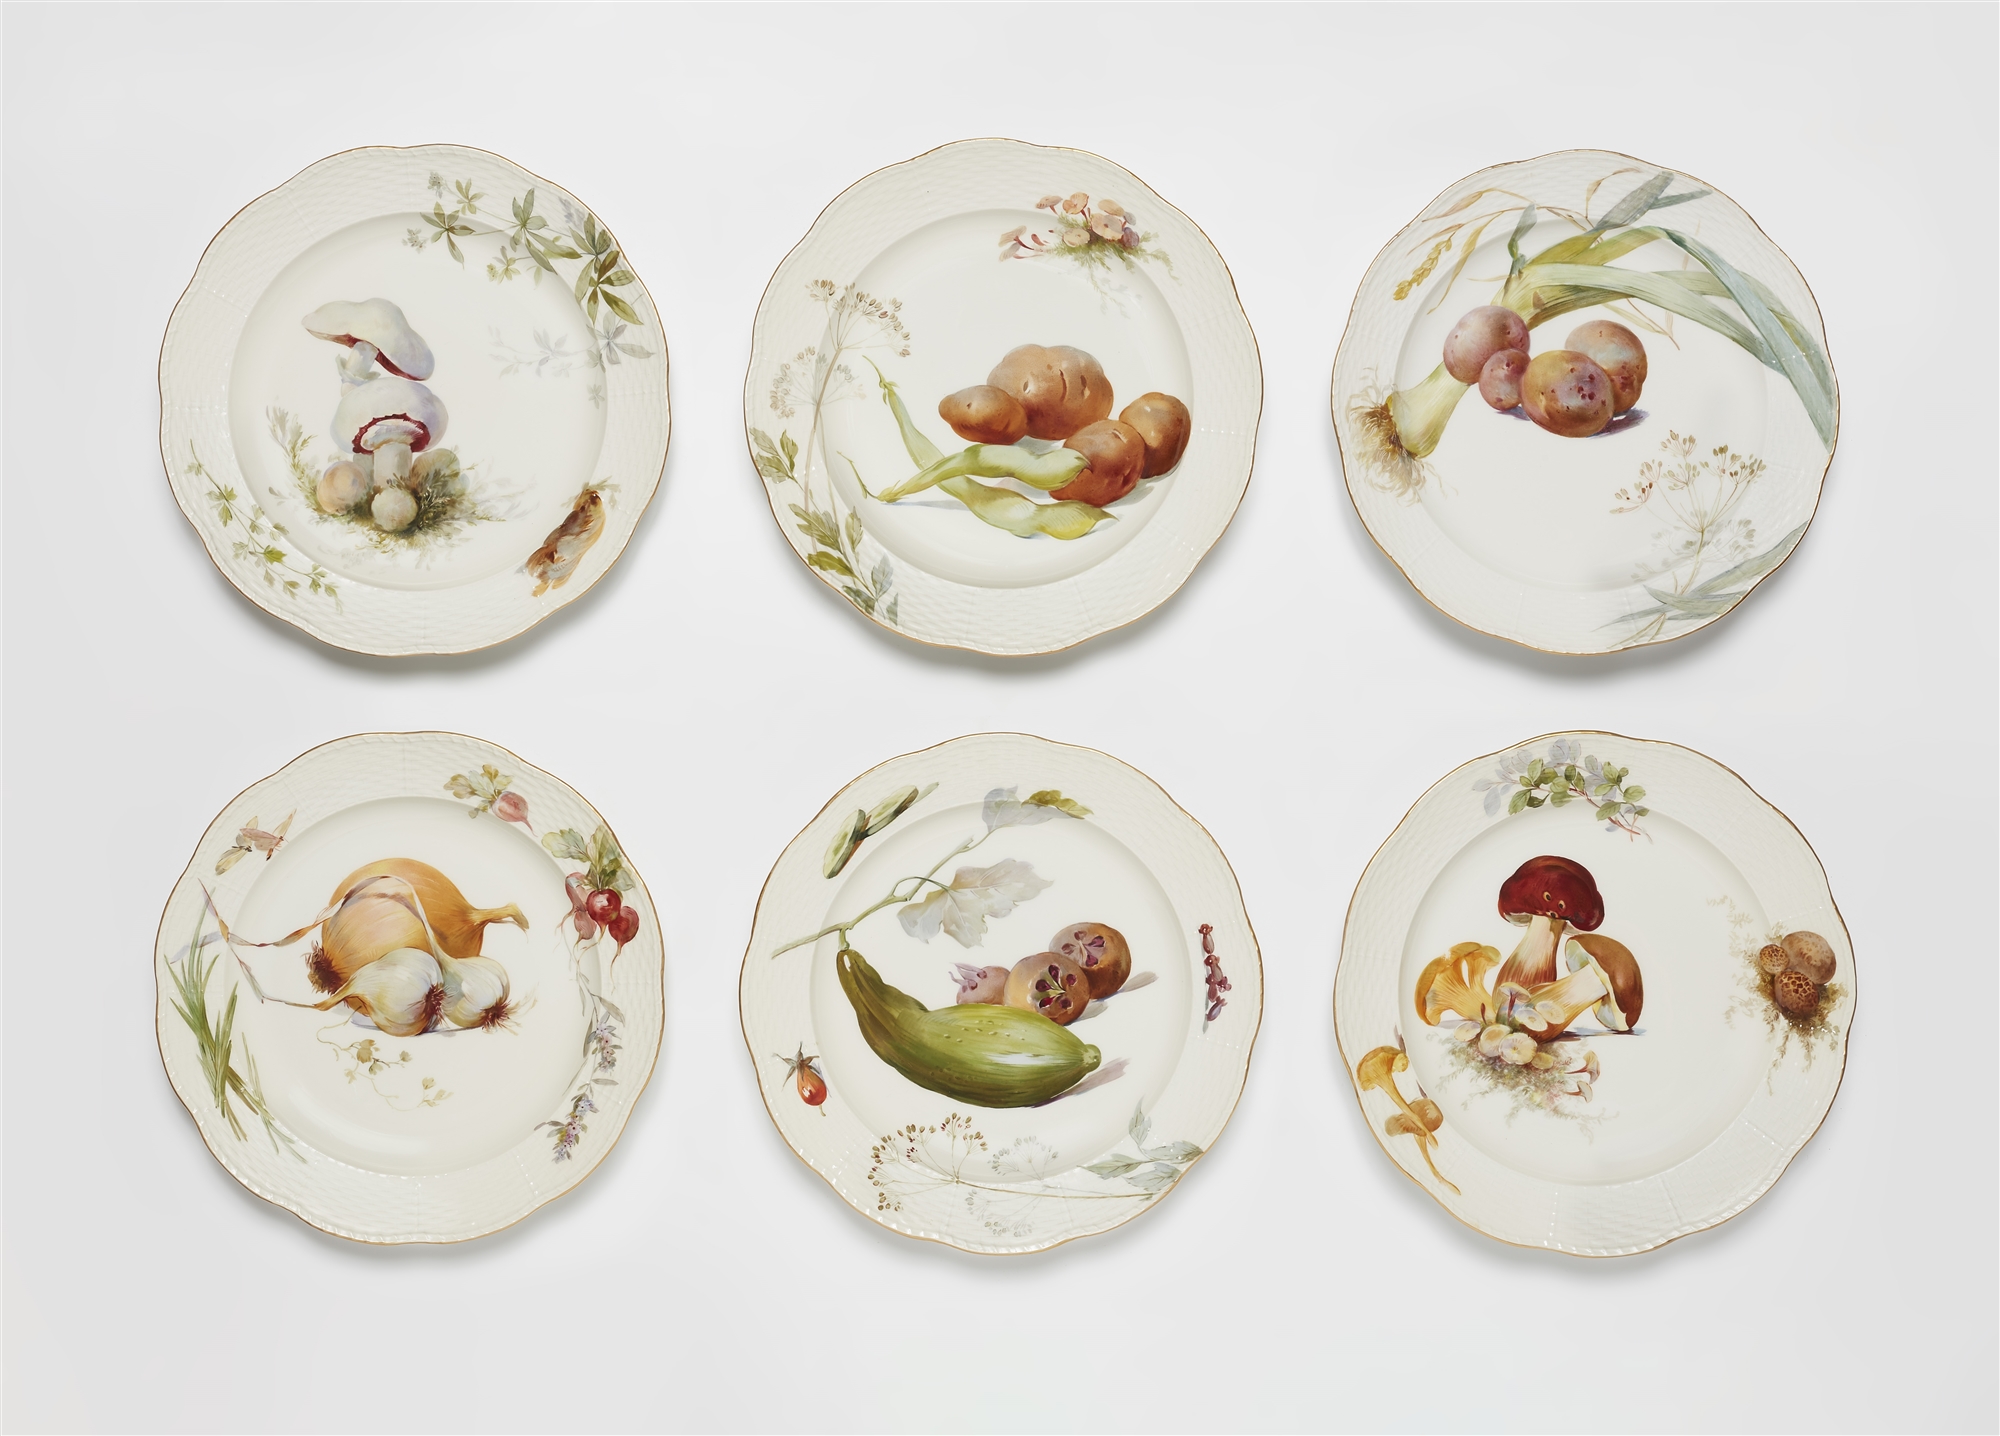 Six Berlin KPM porcelain plates from a dinner service with vegetable motifs in "weichmalerei"